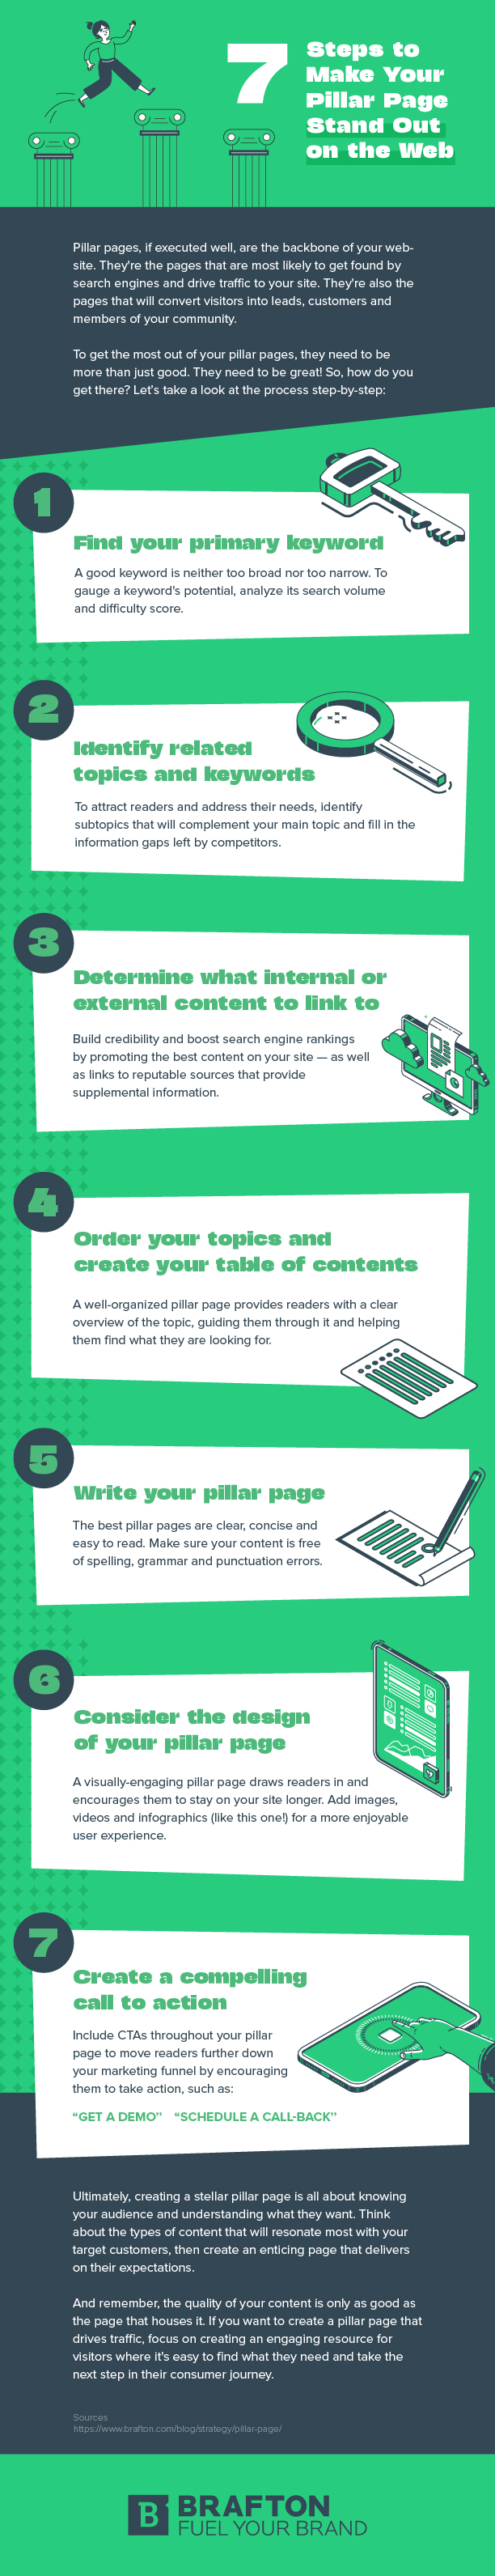 How To Create a Pillar Page That Drives Tons of Traffic Infographic